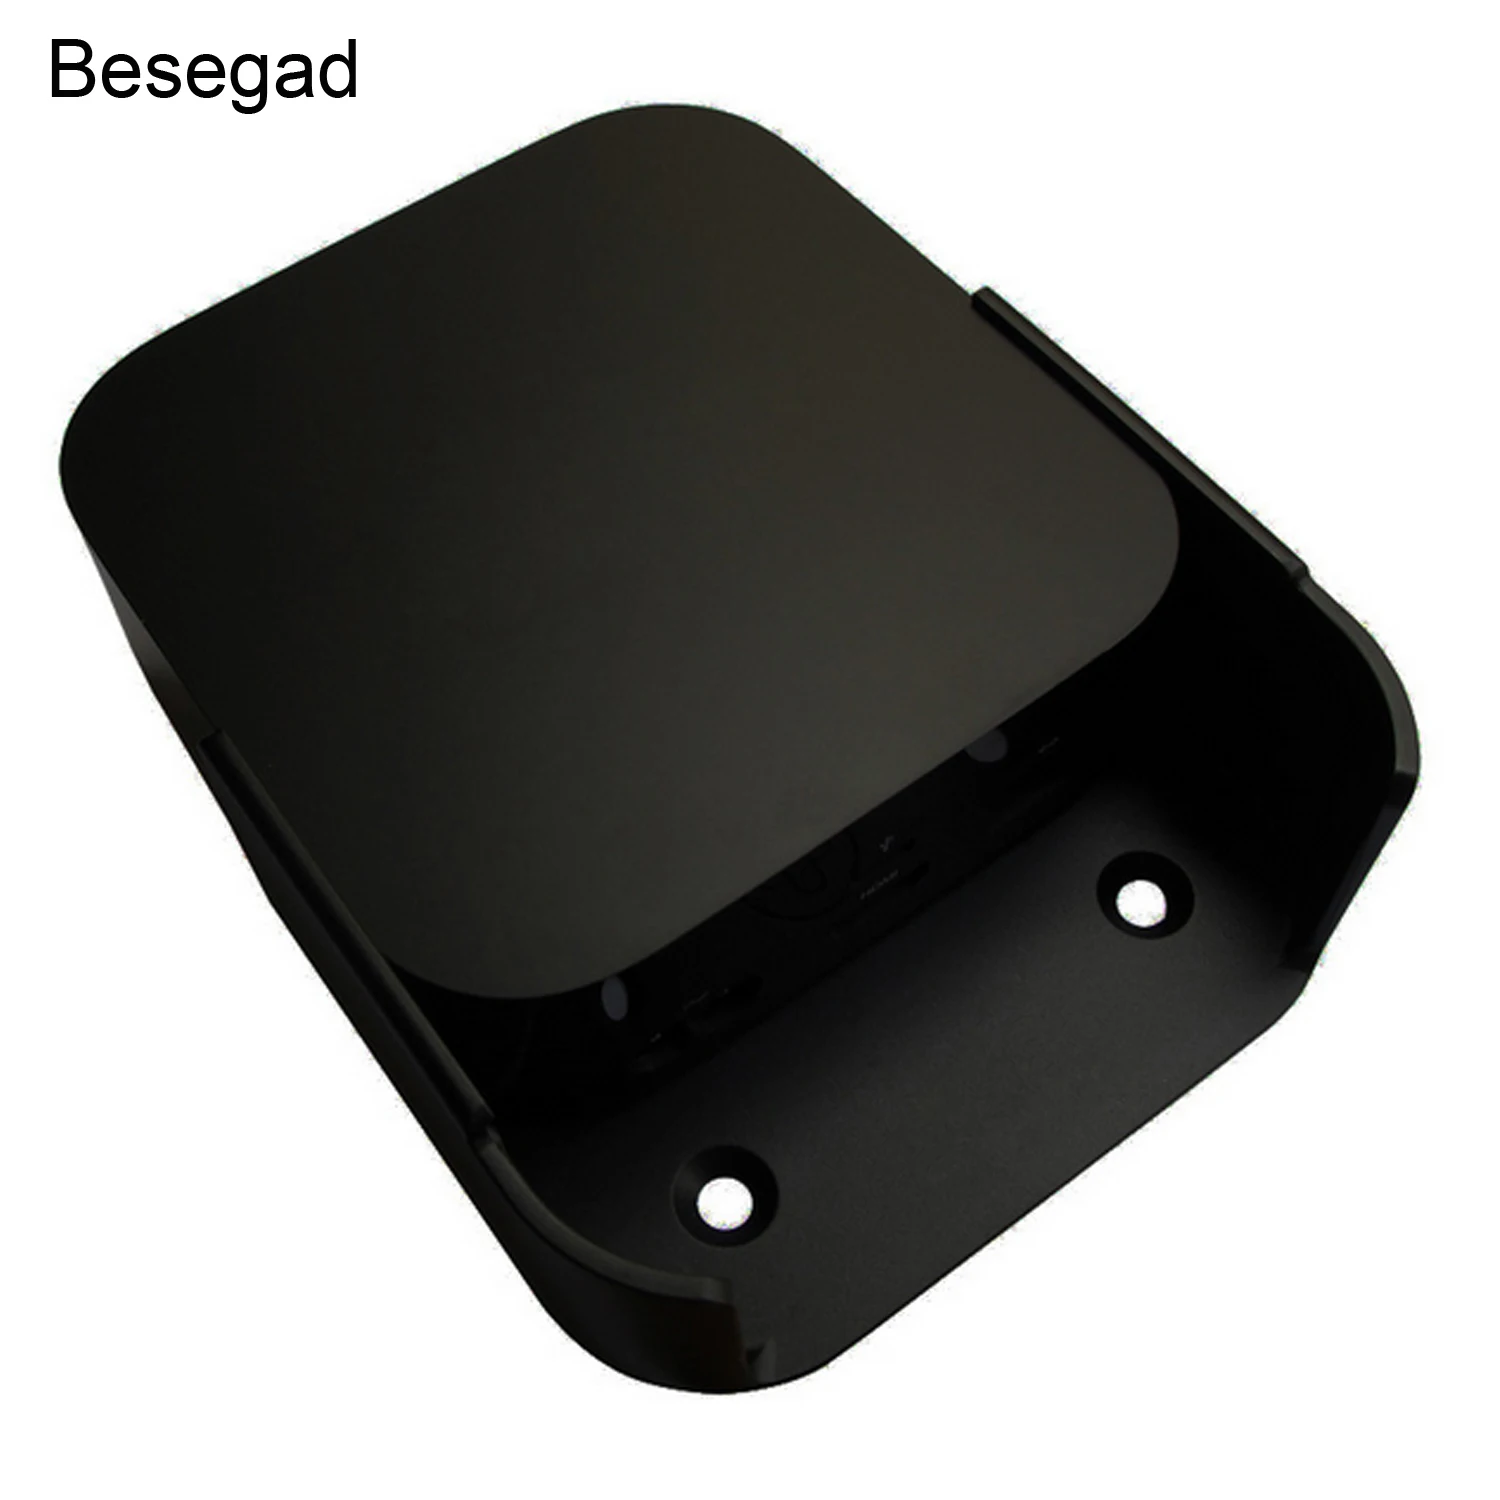 

Besegad Wall Mount Bracket Holder Case For Apple TV 2 3 Set Top Box & Airport Express Series Accessories